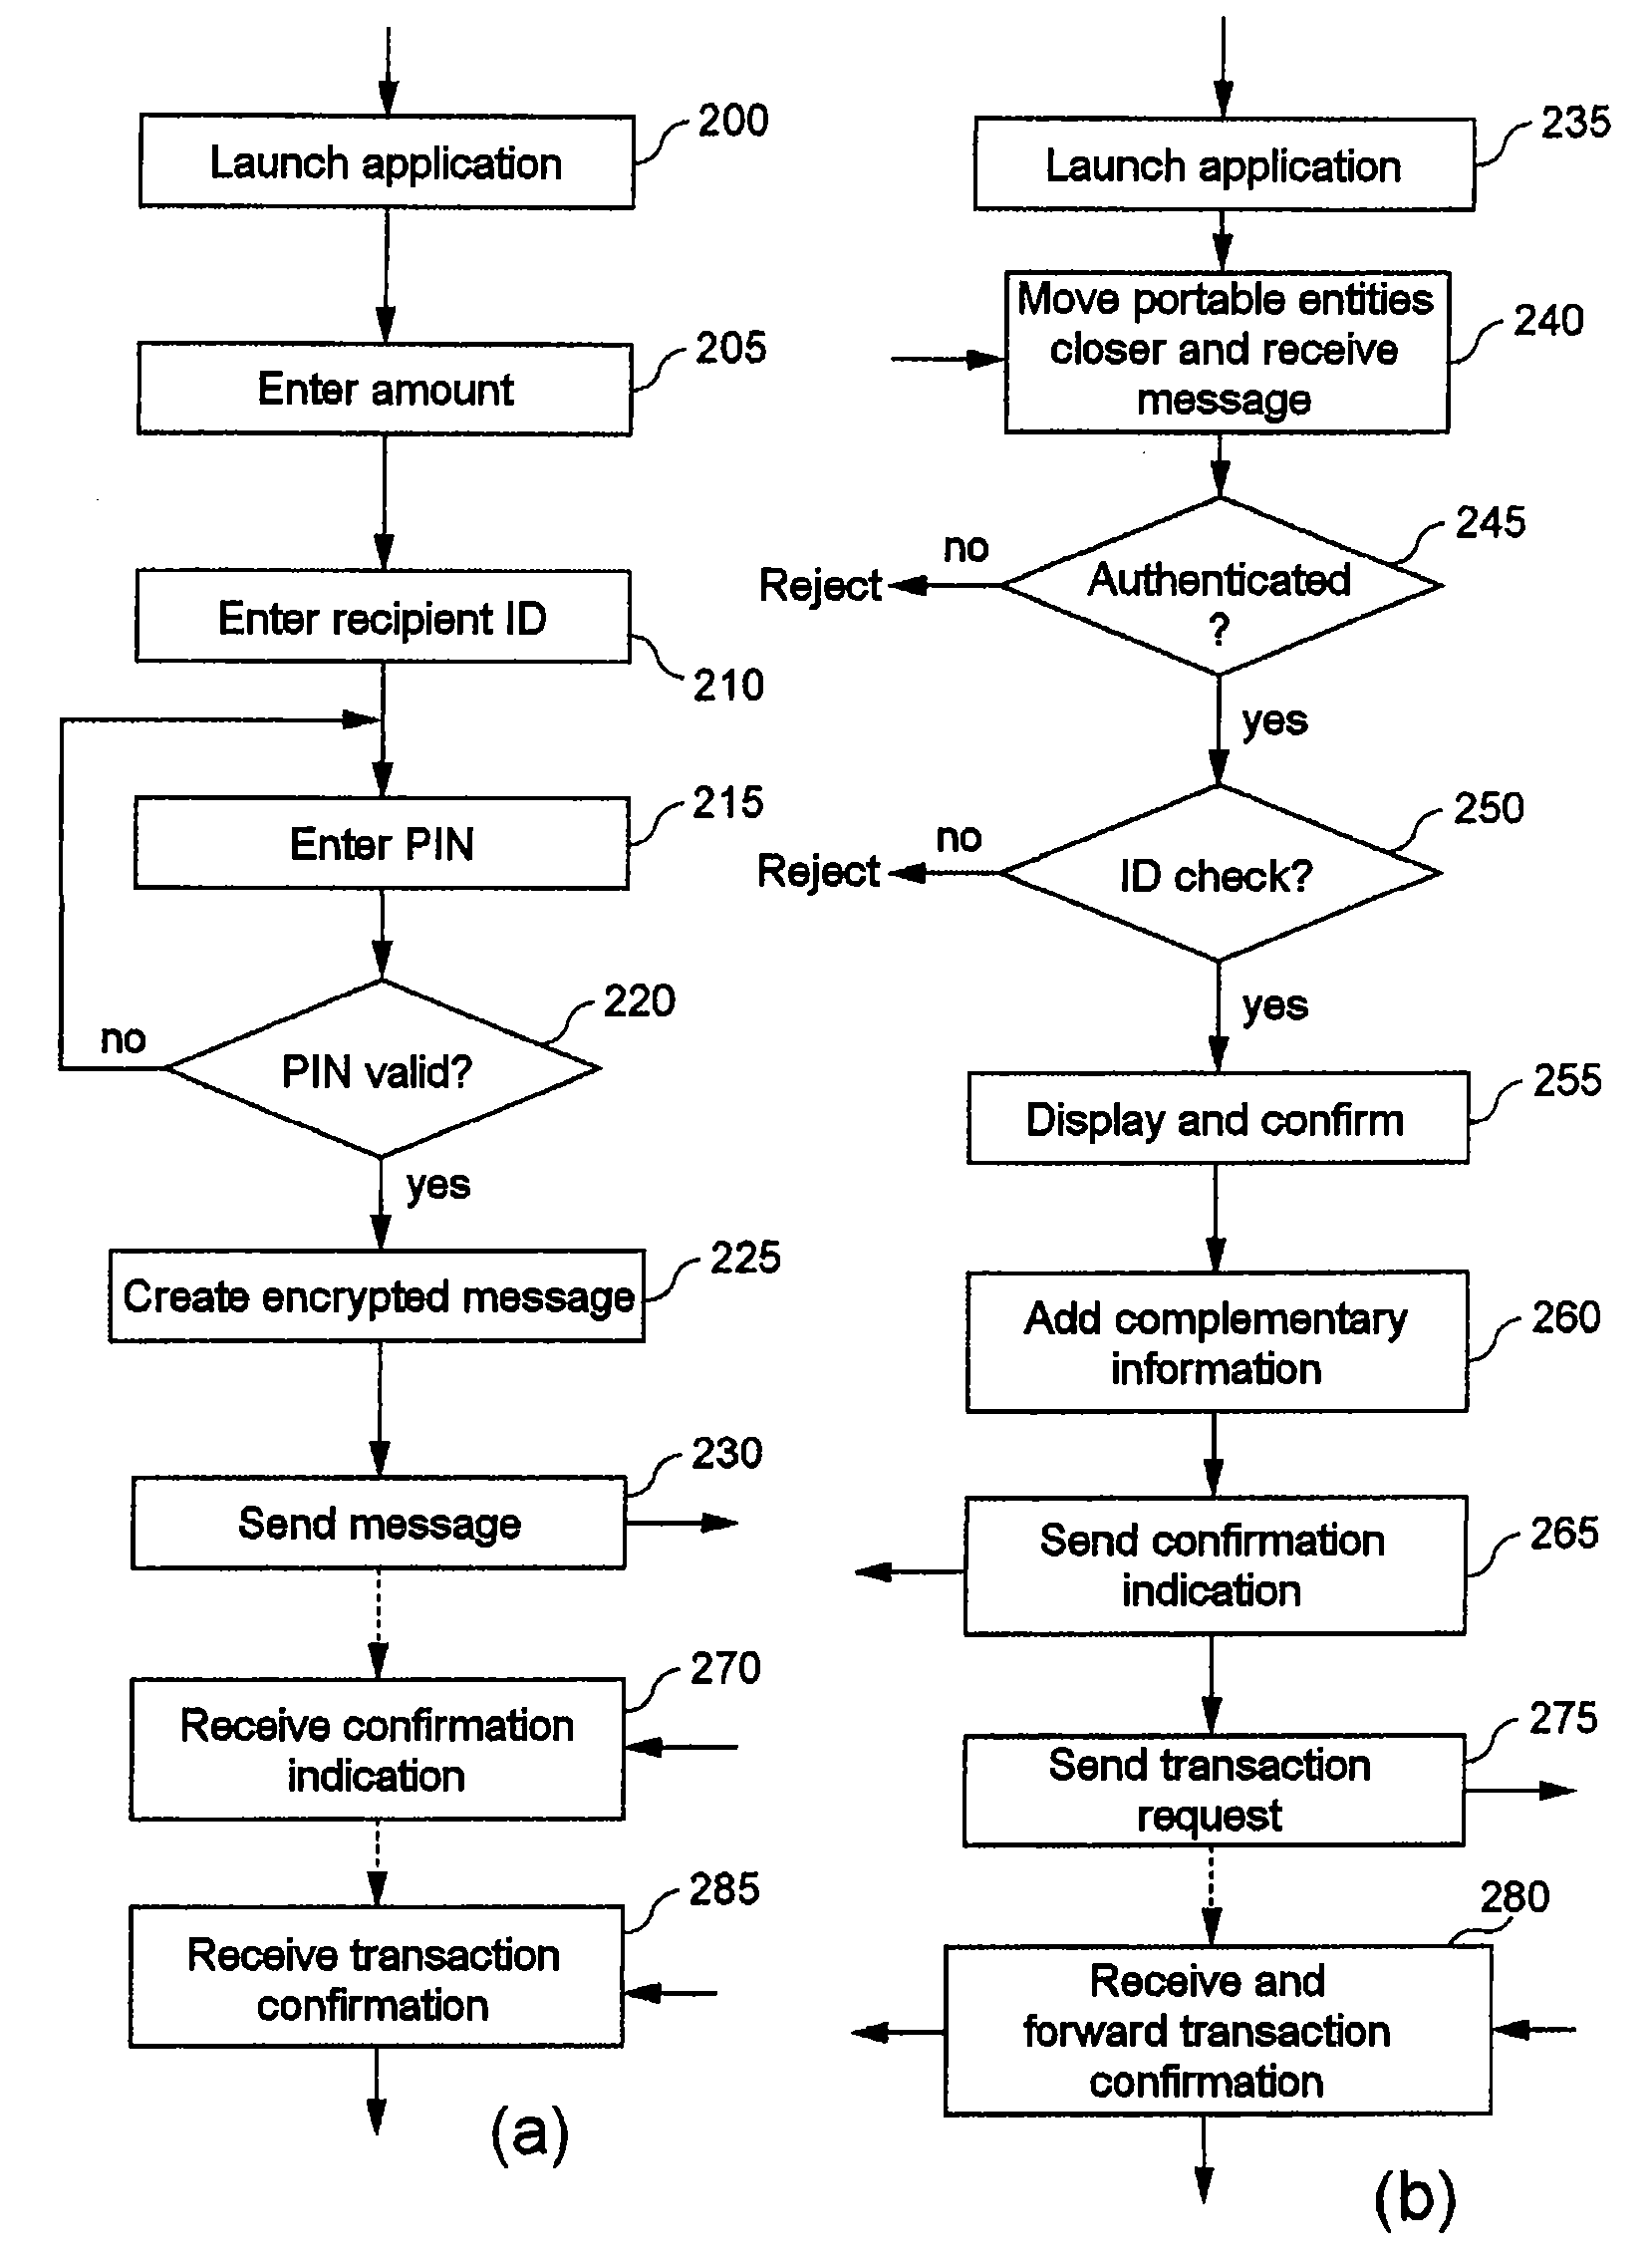 Method and device for exchanging values between personal protable electronic entities